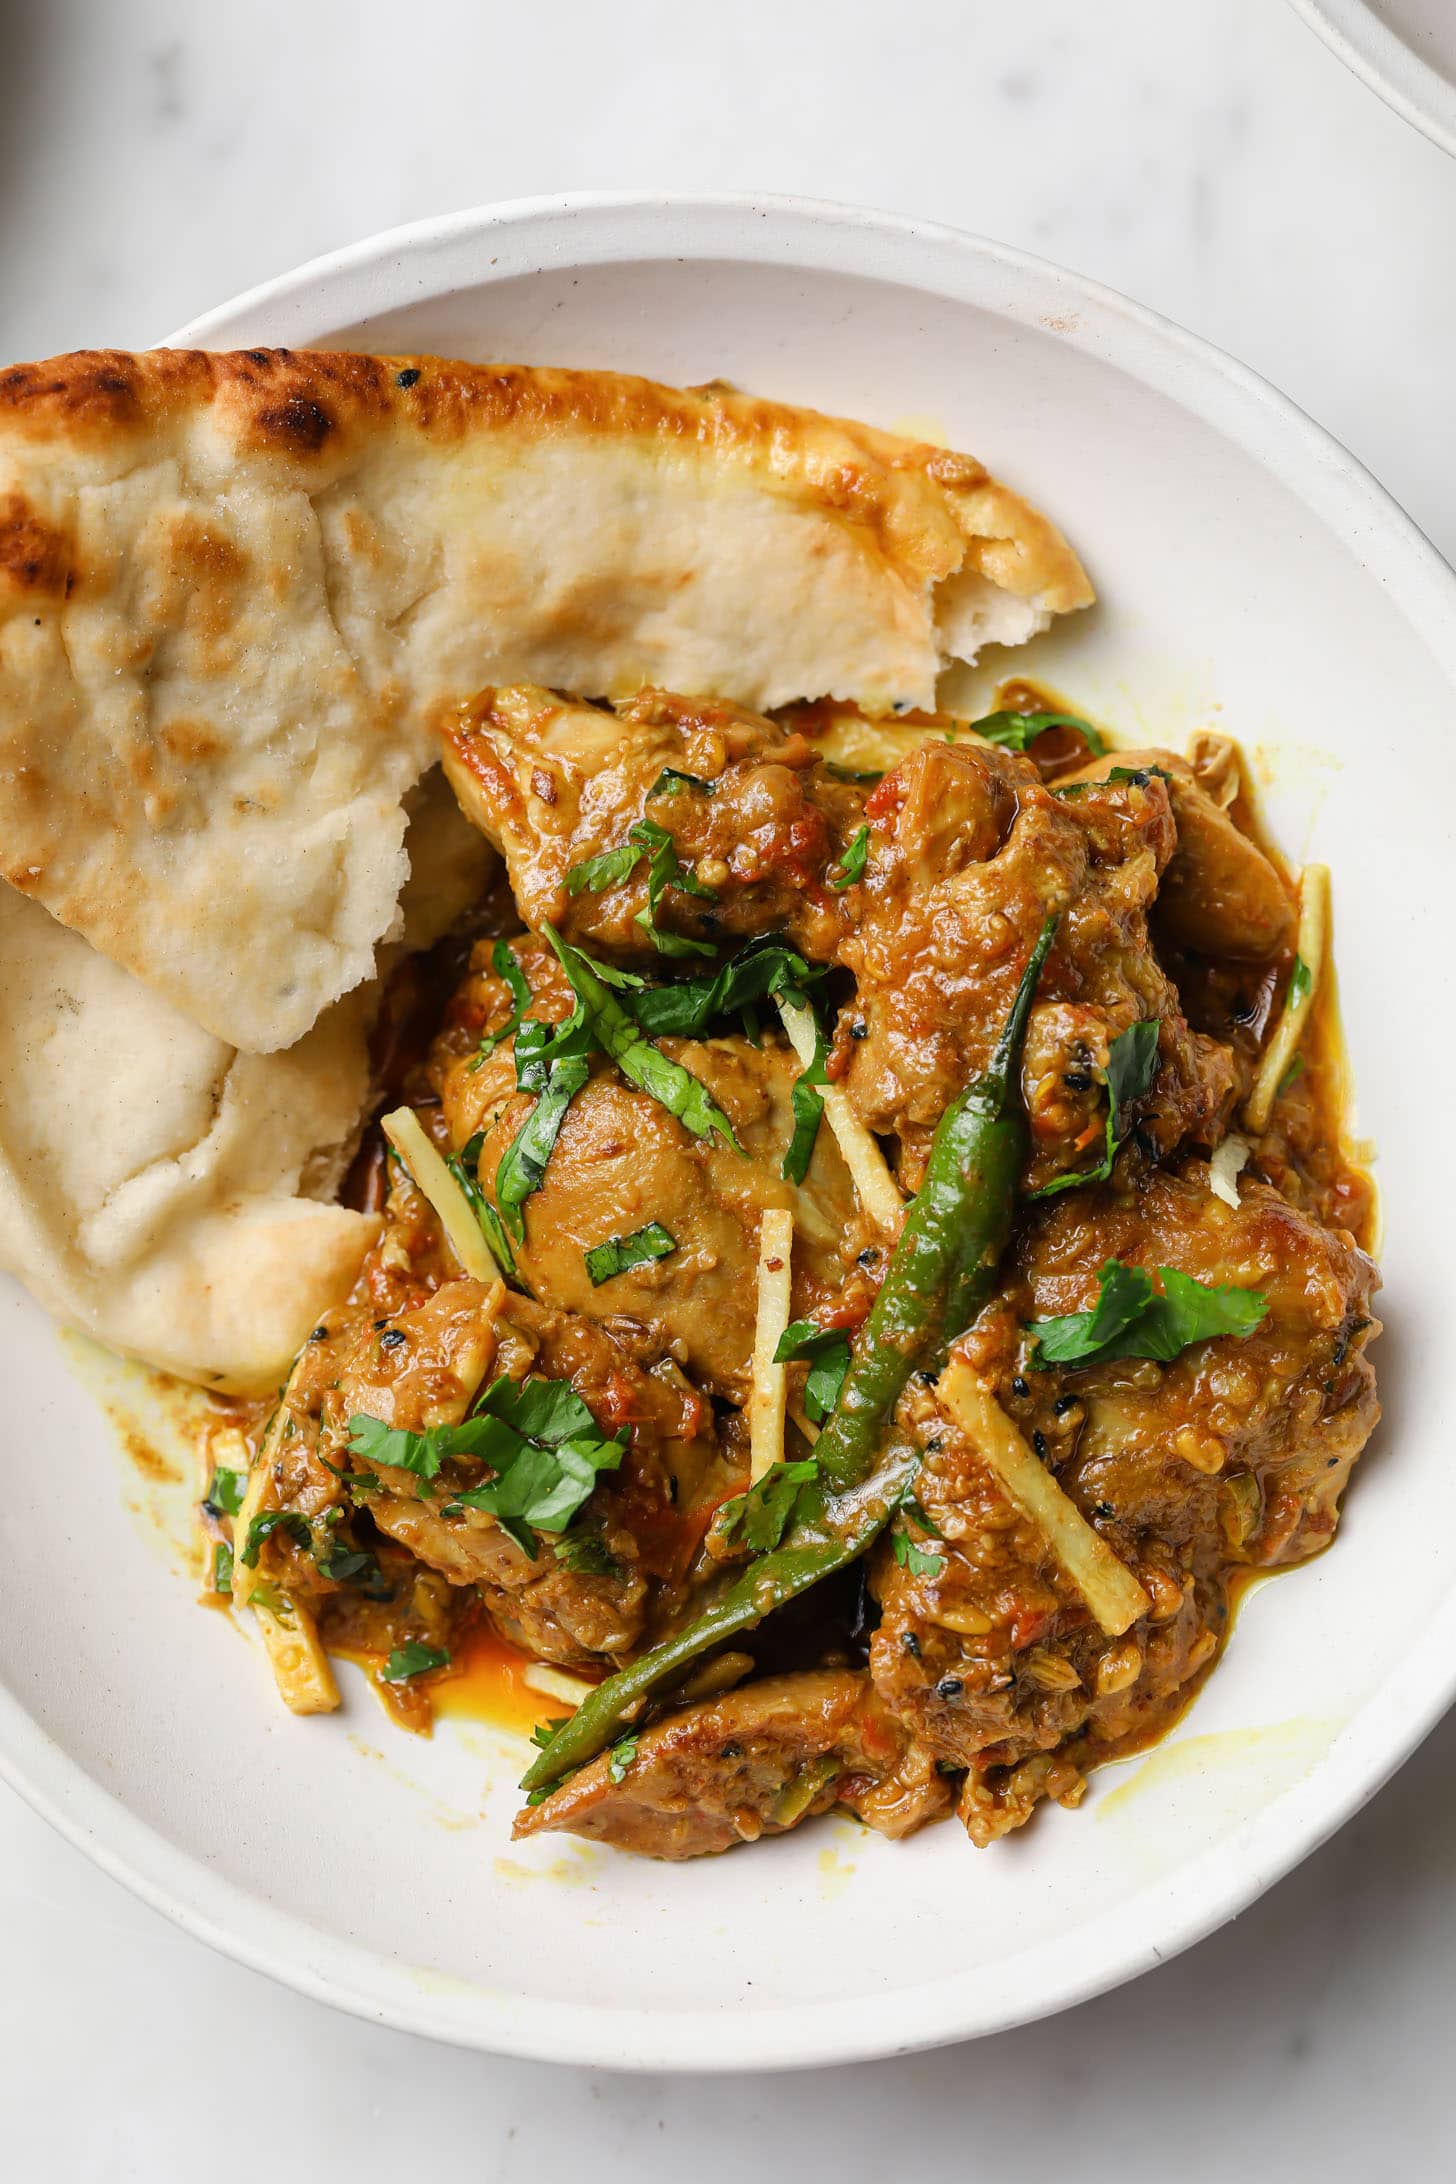 Achari Chicken in a plate with naan on the side